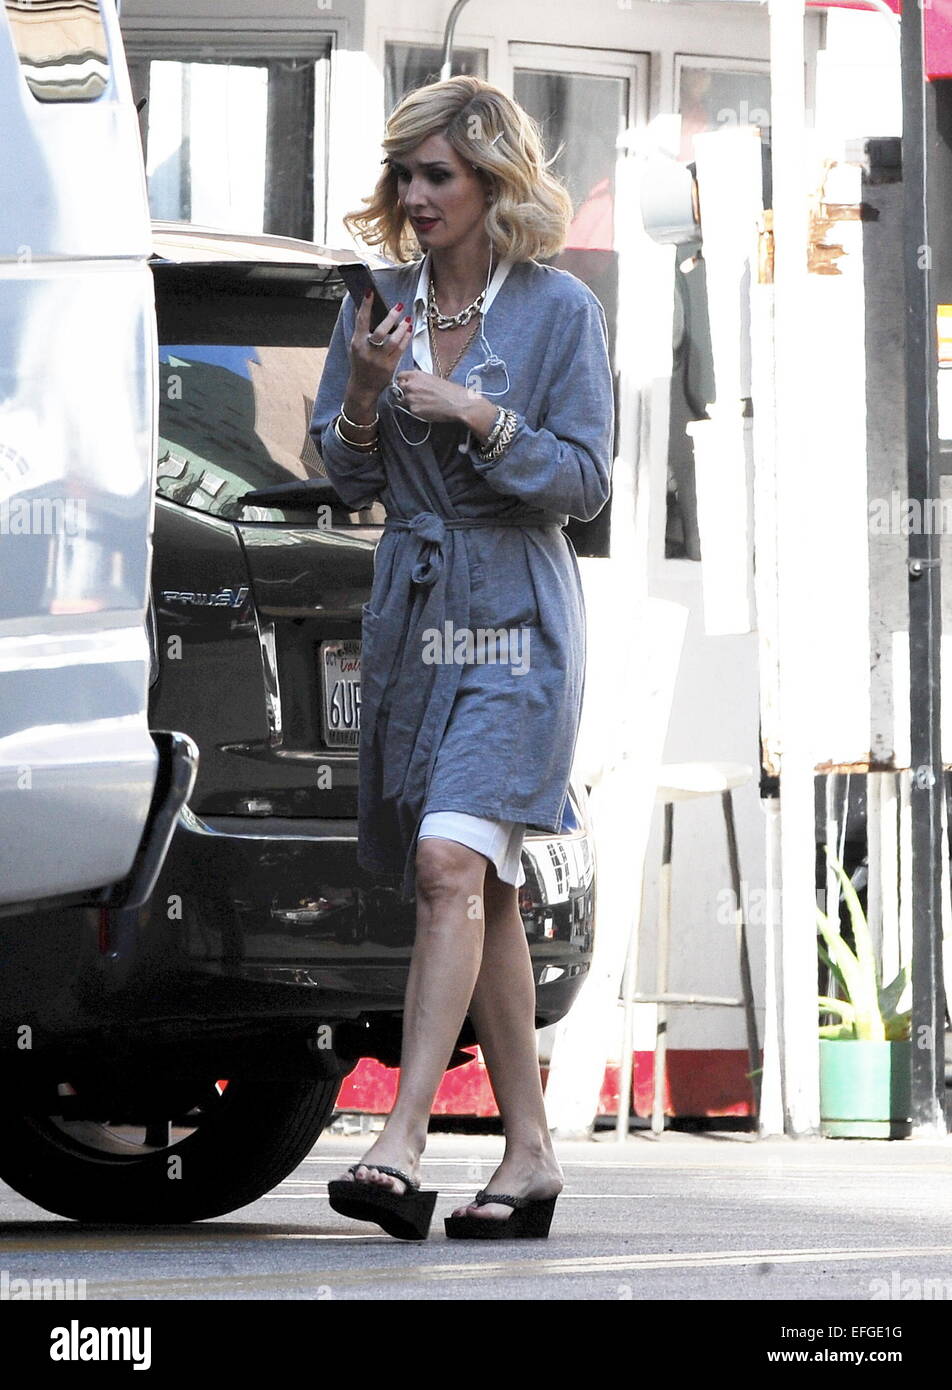 Paz Vega sports a blonde hairdo on the set of 'Beautiful and Twisted,' which is currently filming in downtown Los Angeles. Vega plays a former stripper who is a prime suspect in the murder of her husband.  Featuring: Paz Vega Where: Los Angeles, Californi Stock Photo